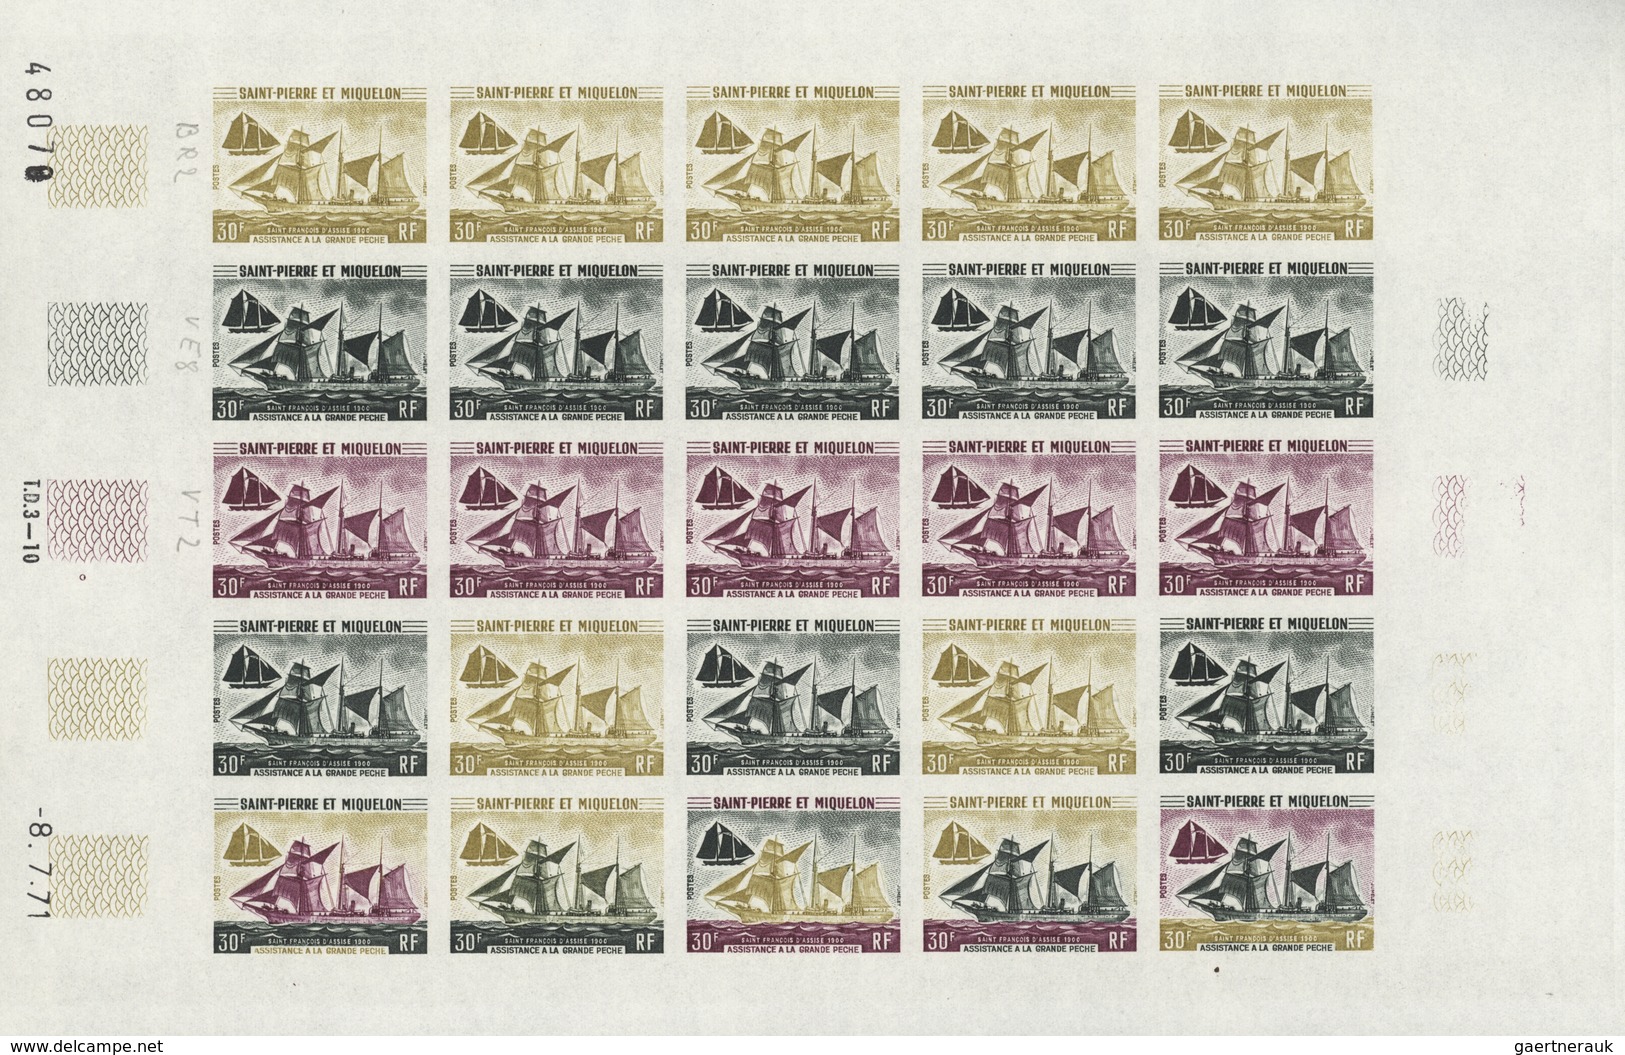 St. Pierre und Miquelon: 1969/1975, IMPERFORATE COLOUR PROOFS, MNH collection of 49 complete sheets